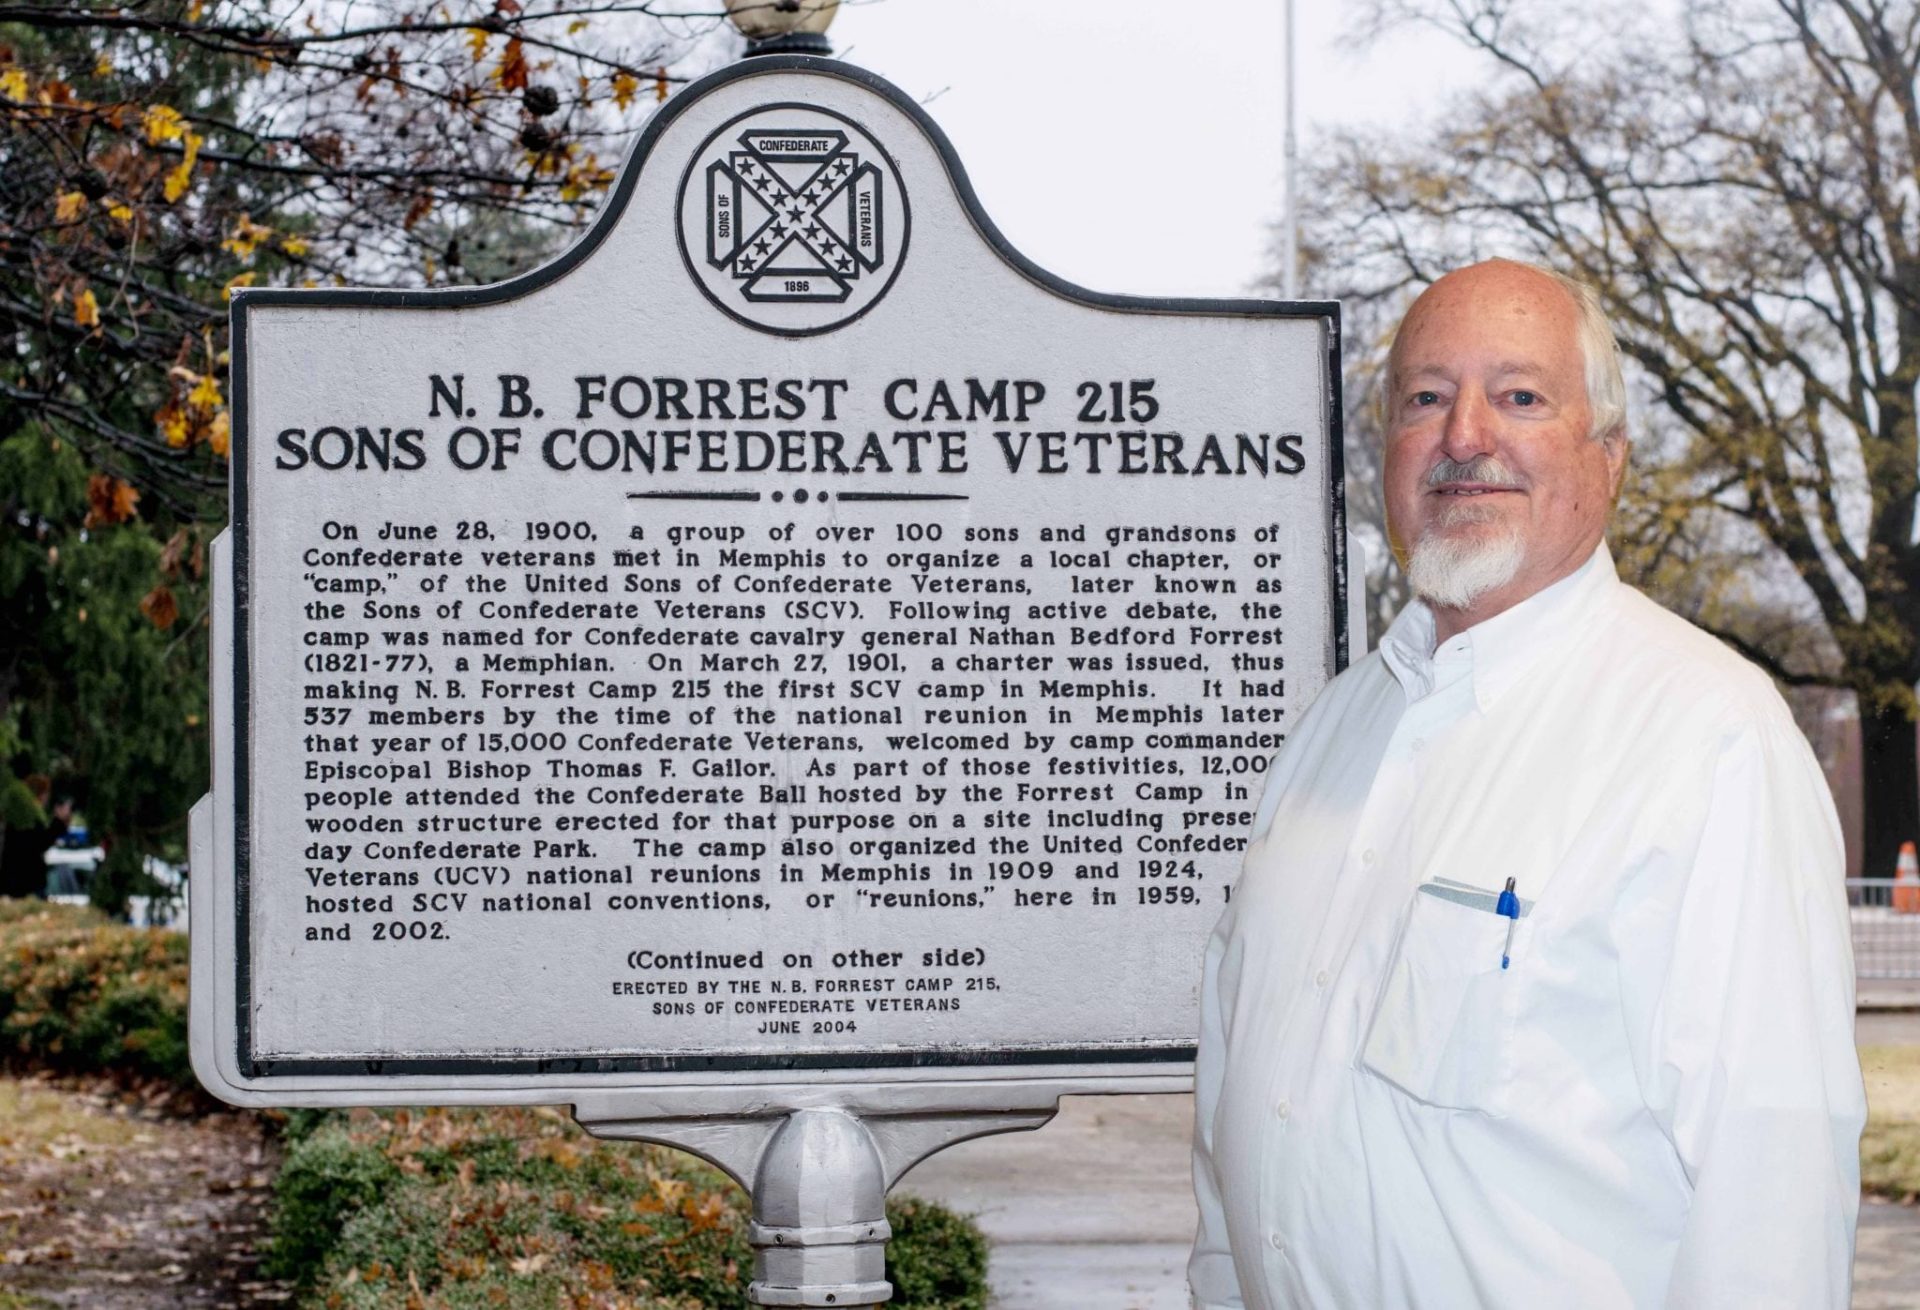 AFTER THE TAKEDOWN: Sons of Confederate Veterans' Lee Millar: 